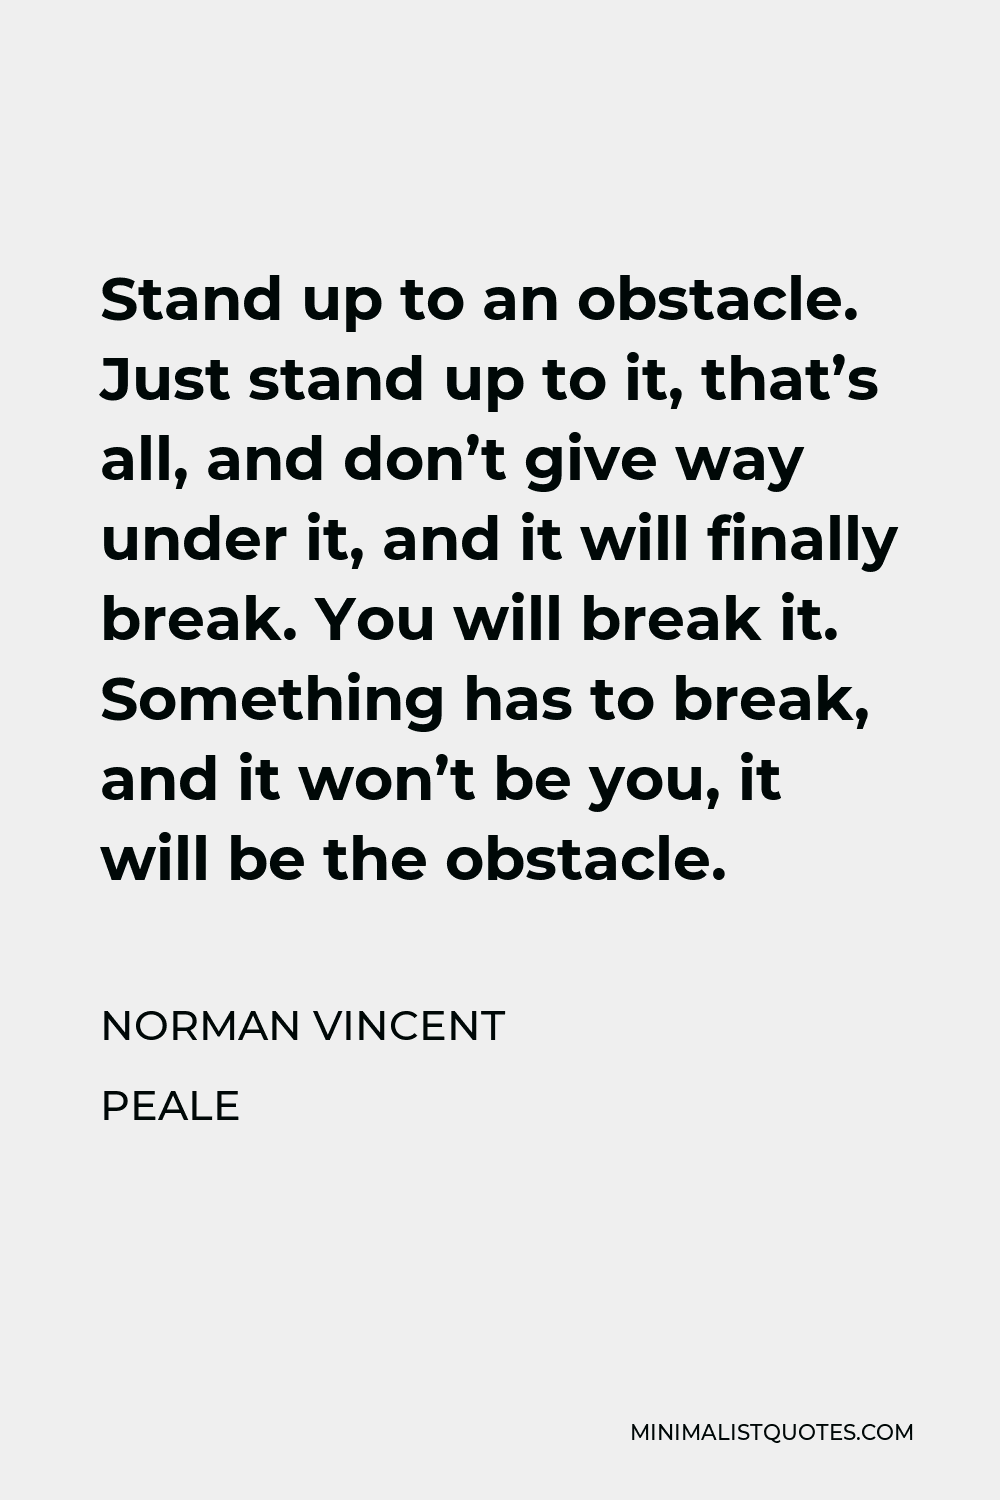 Norman Vincent Peale Quote - Stand up to an obstacle. Just stand up to it, that’s all, and don’t give way under it, and it will finally break. You will break it. Something has to break, and it won’t be you, it will be the obstacle.